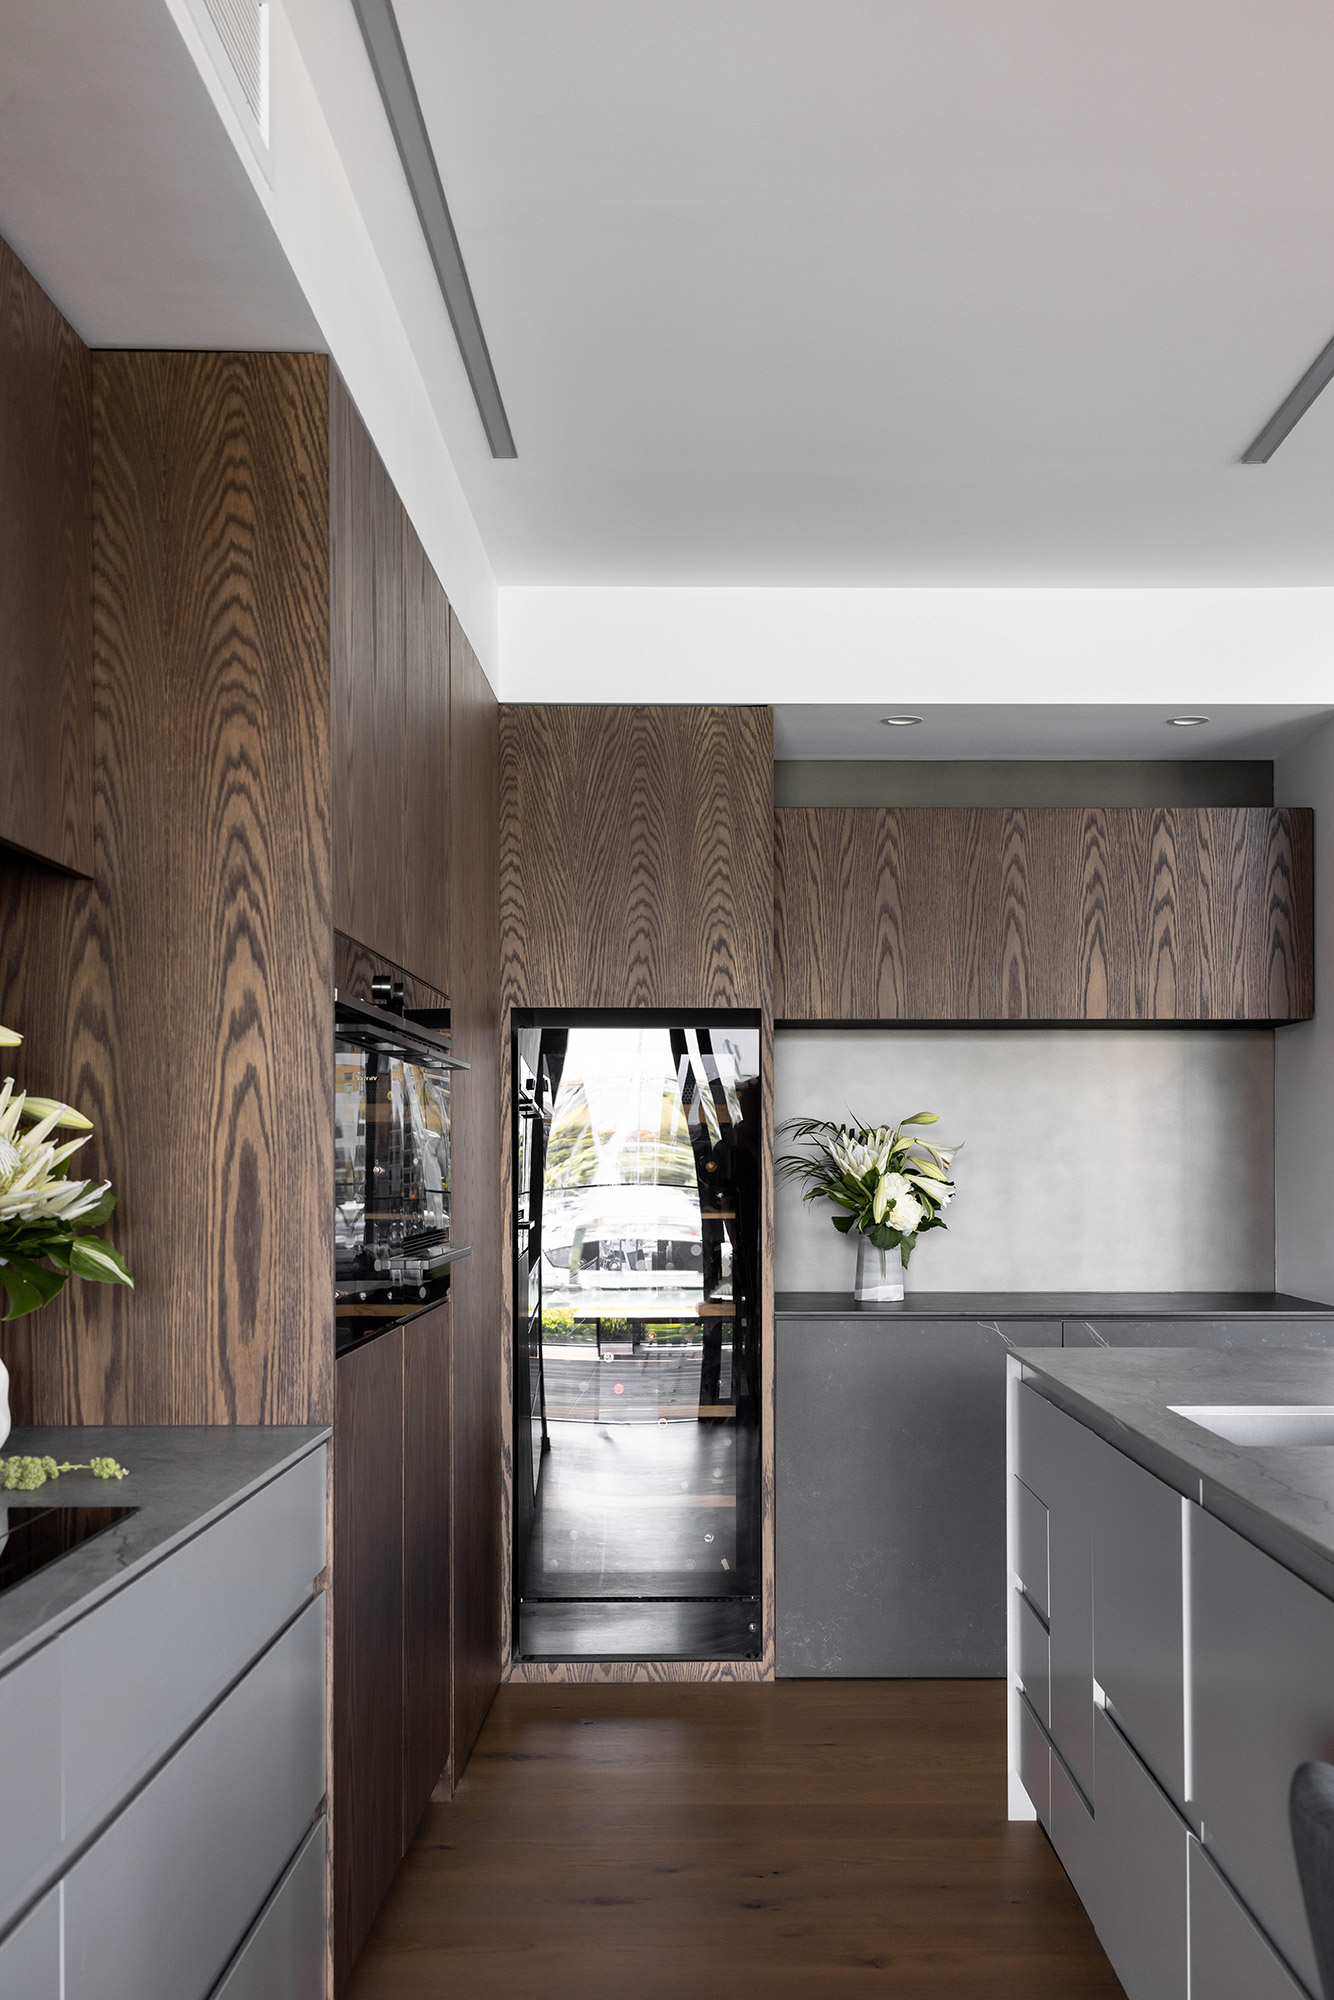 Image of Gulf Harbour 3 in Two Dekton colours to match wood in kitchens and bathrooms - Cosentino